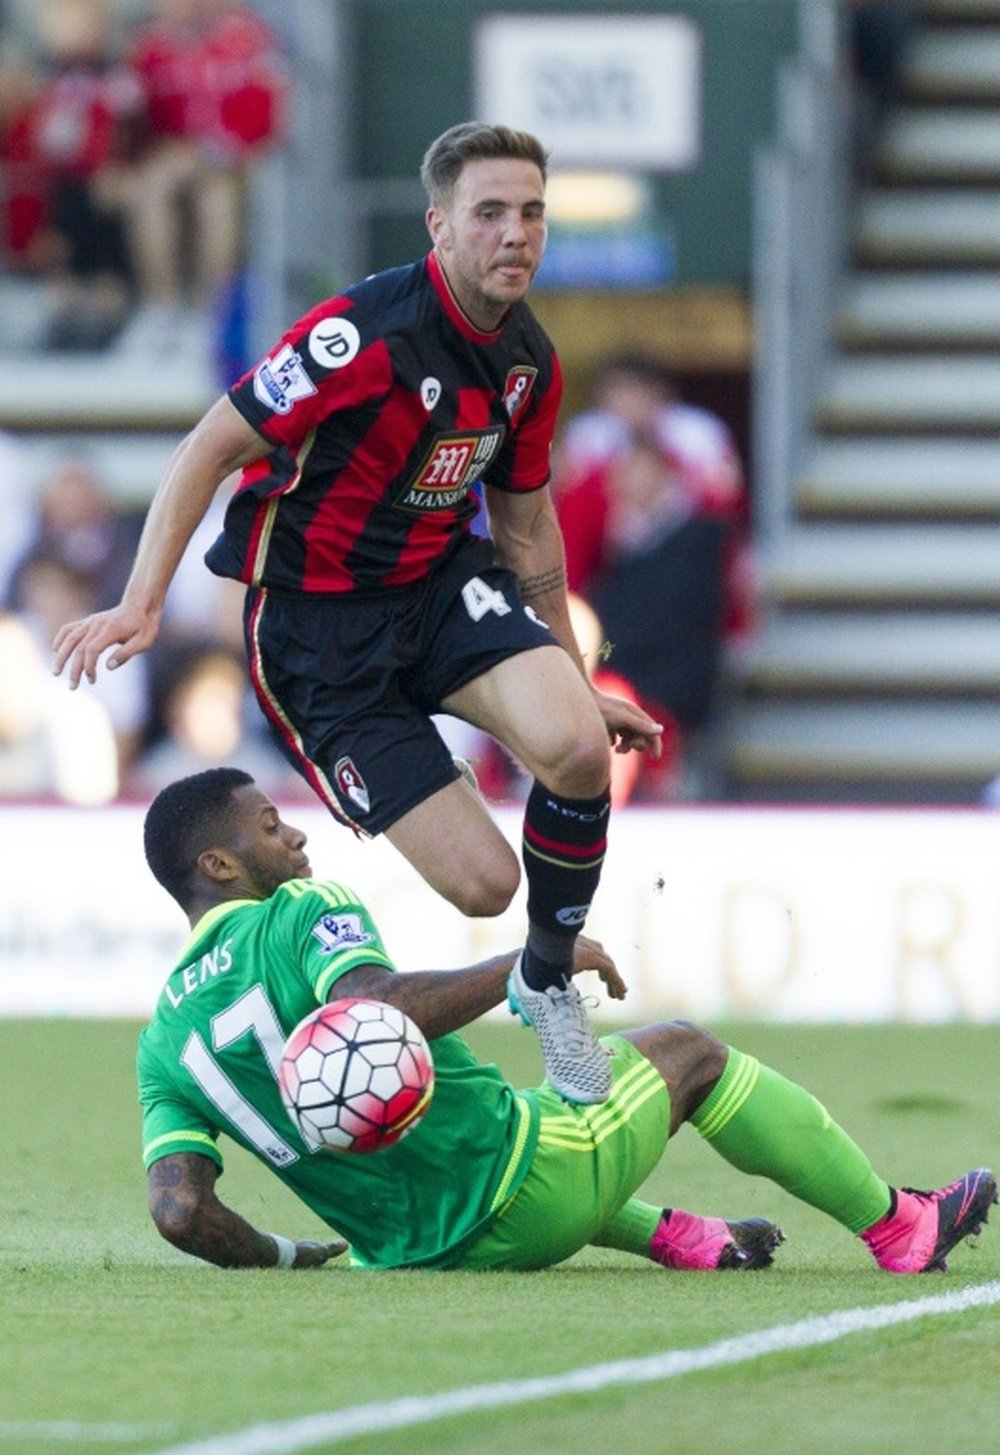 Bournemouth's Dan Gosling extends his contract at Bournemotuh. AFP